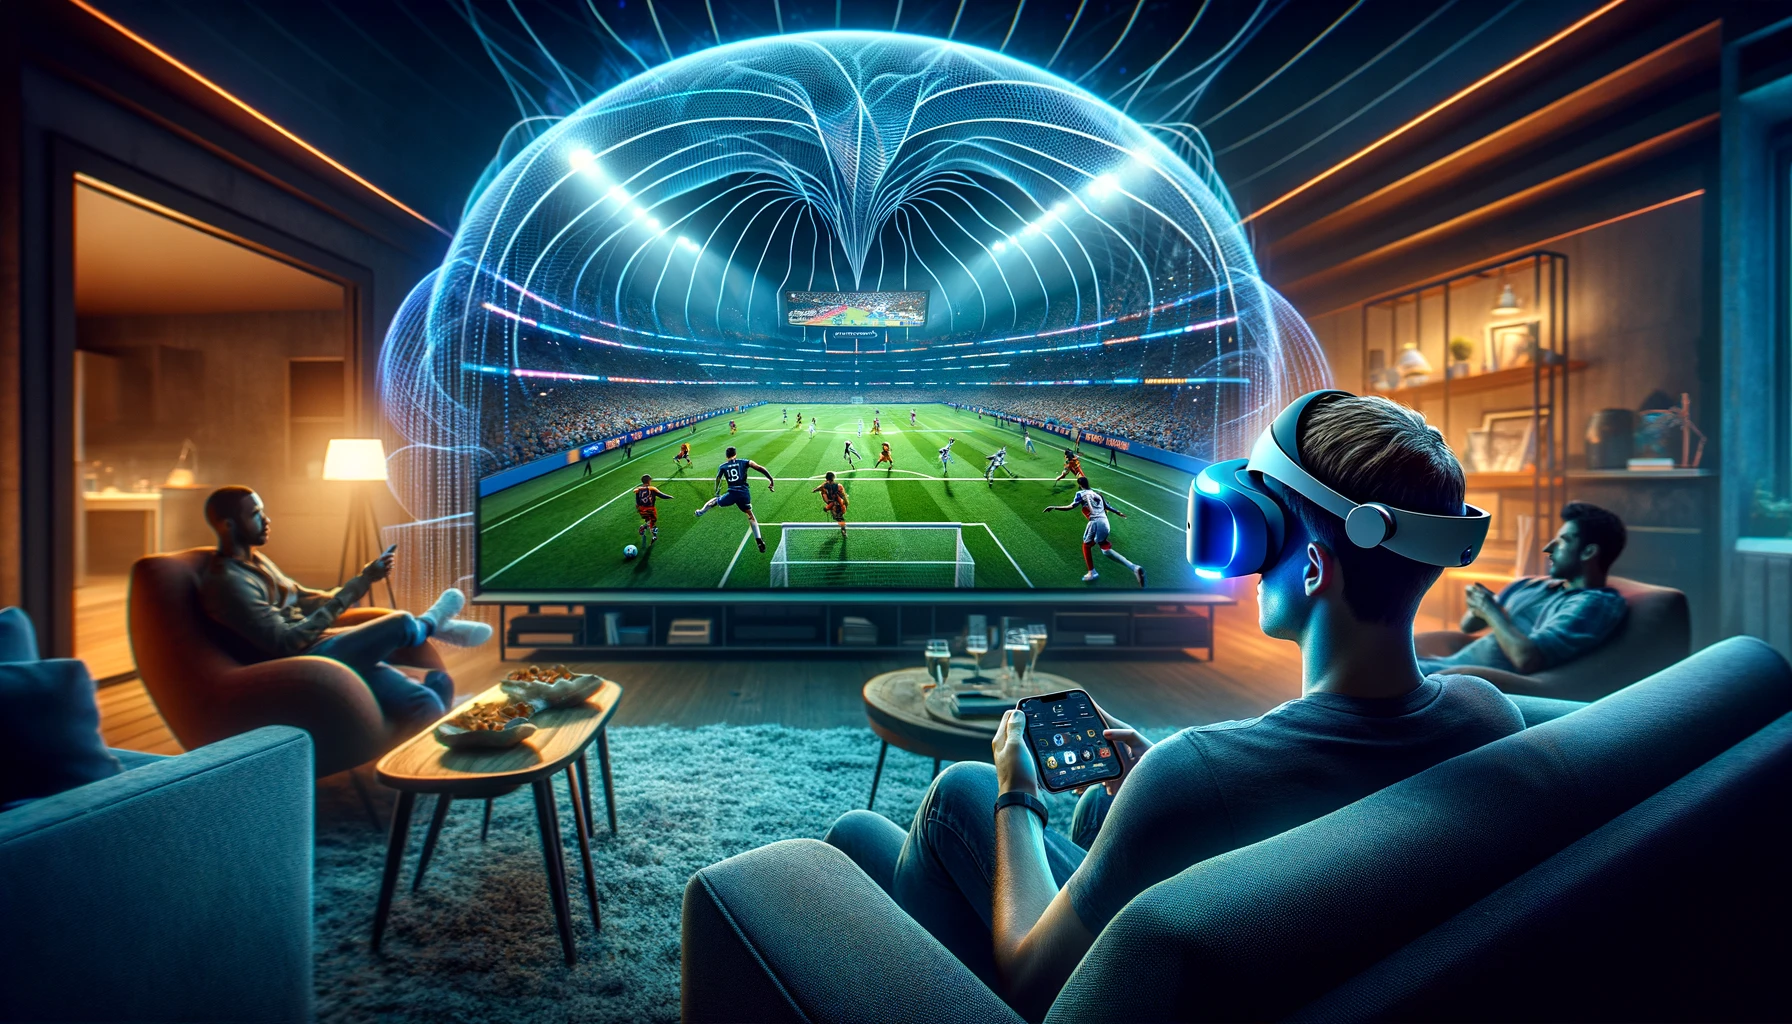 Sports Teams Can Leverage AR and VR Technologies to Deepen Fan Engagement & Unlock Real-Time Revenue Opportunities